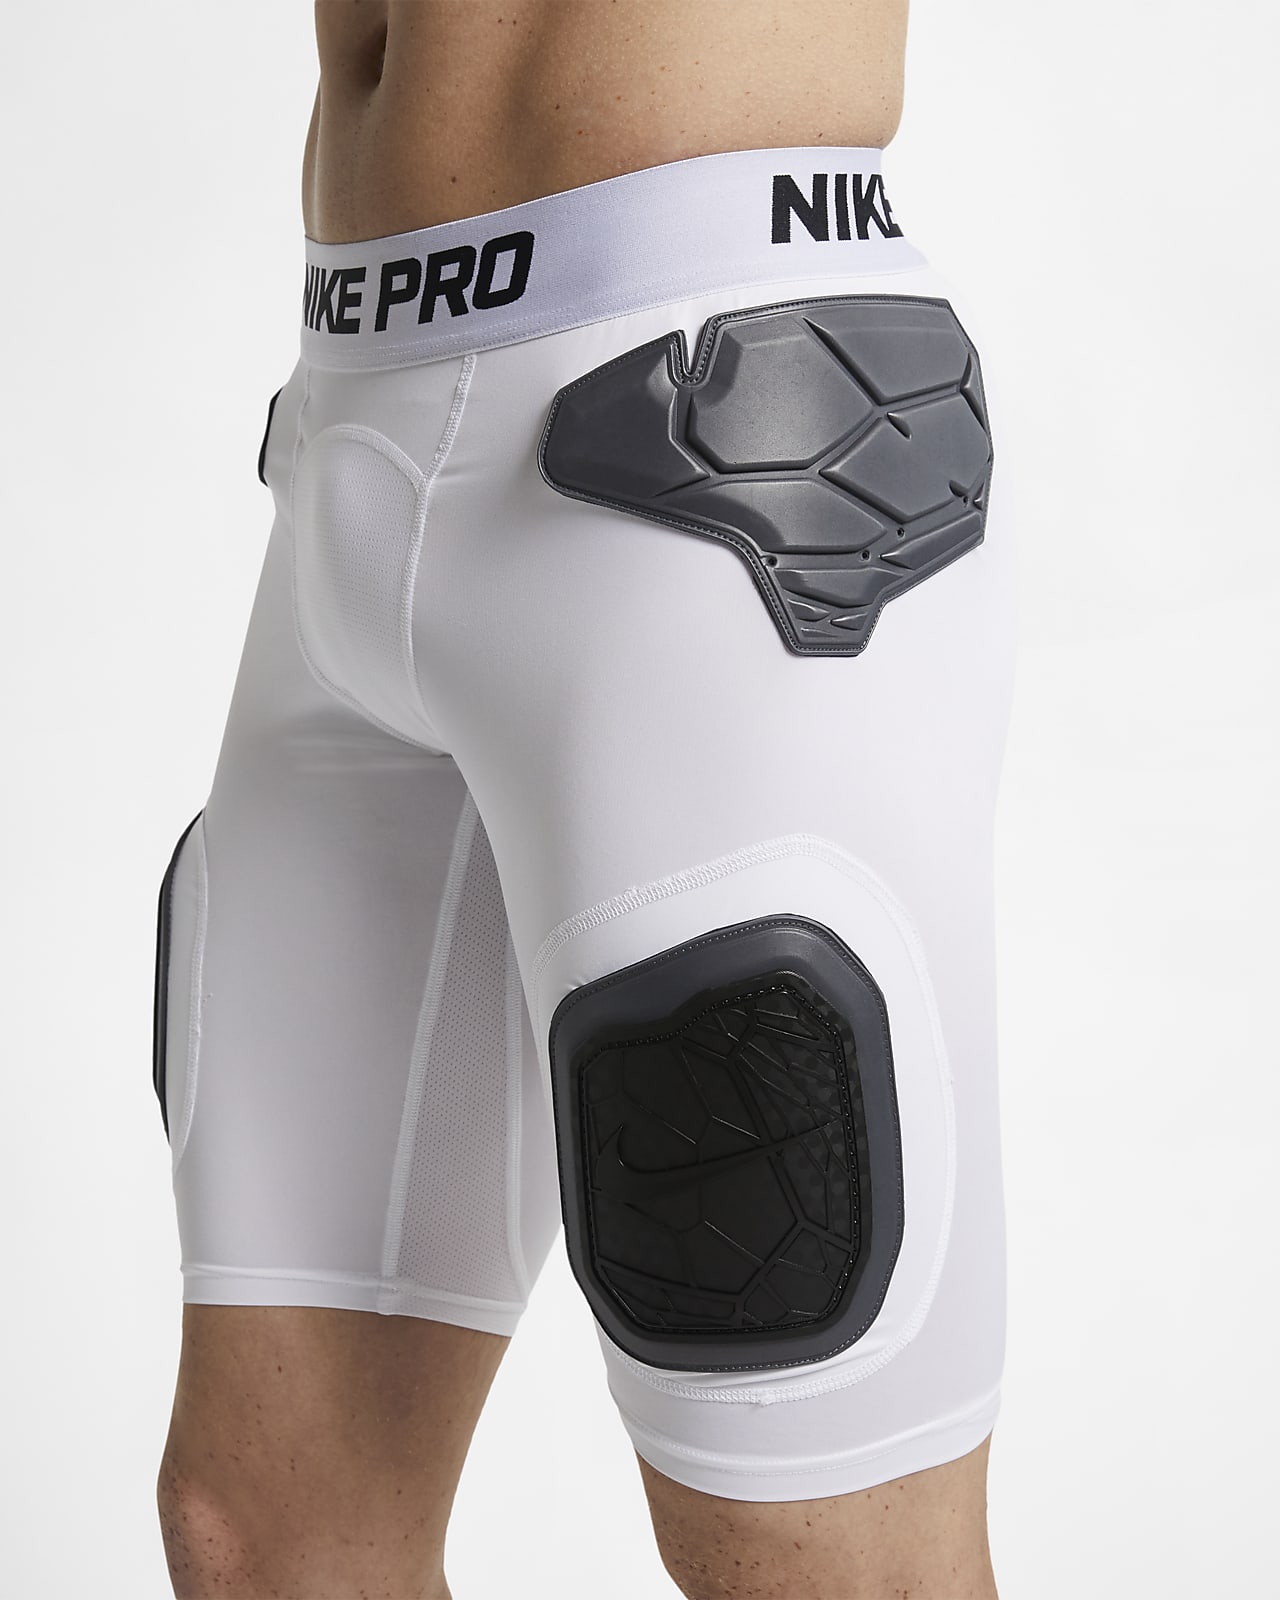 Nike NBA Pro Hyperstrong Padded Compression Shorts Nepal